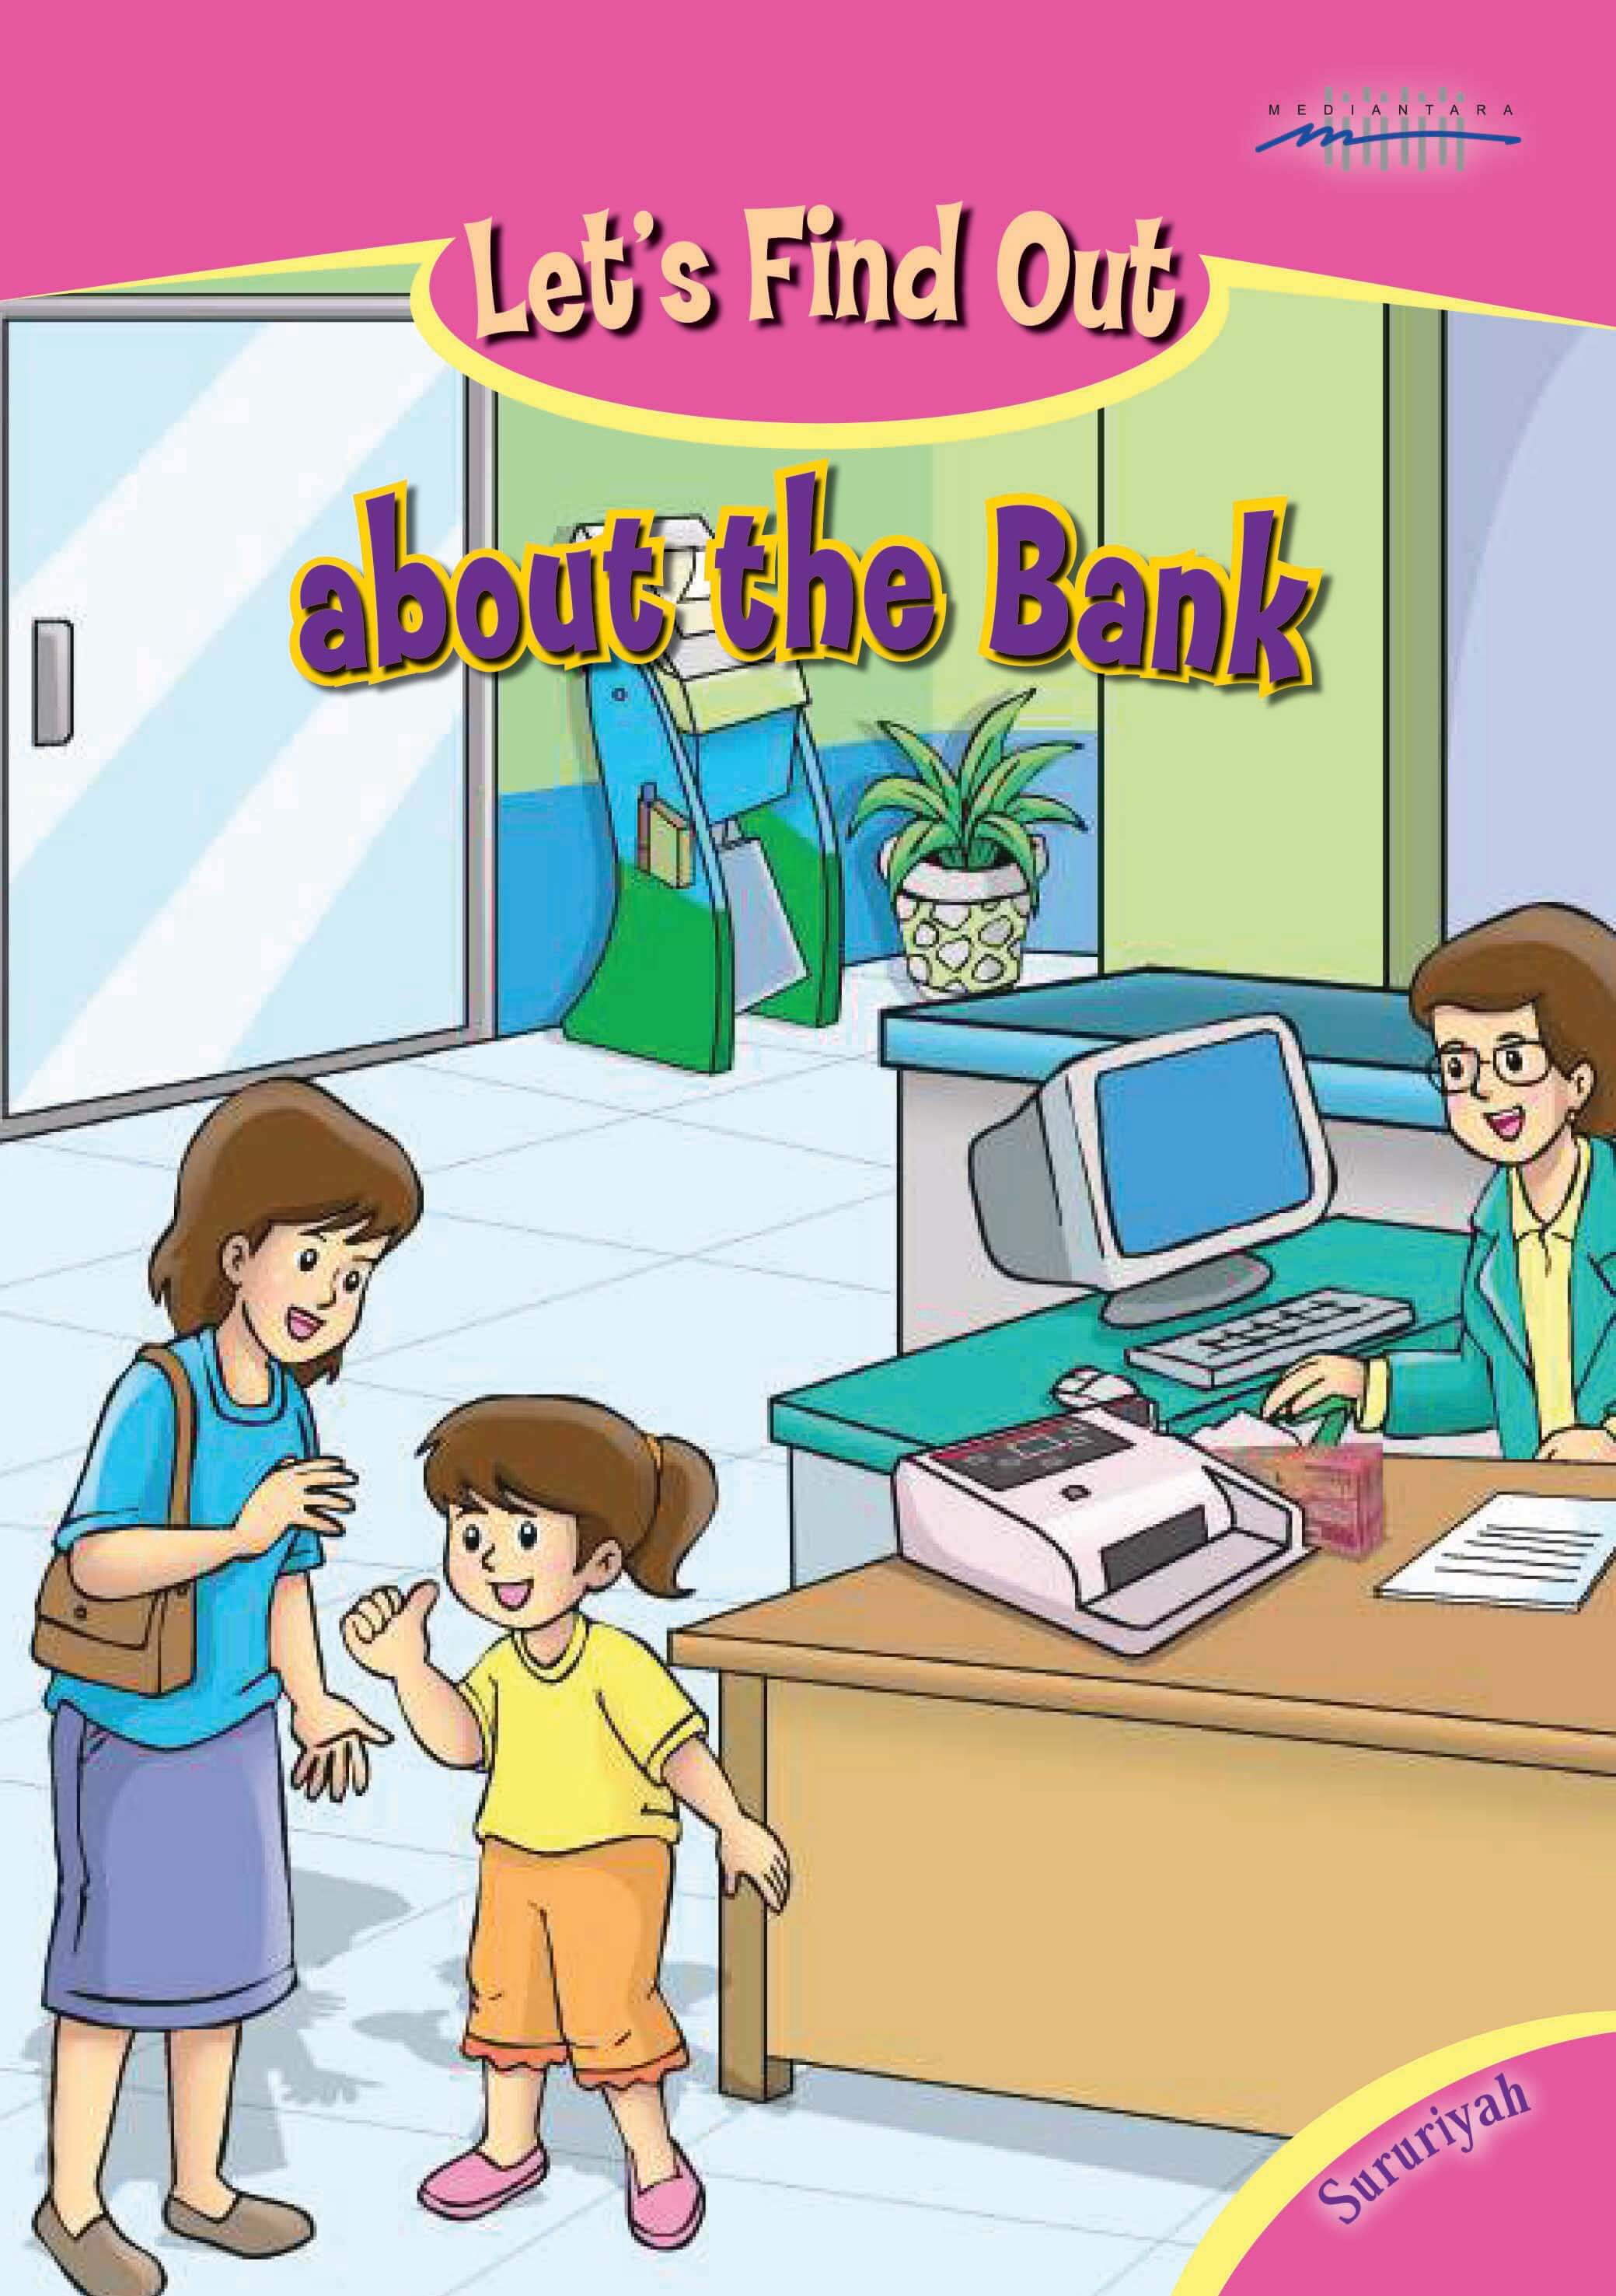 Let's Find Out about the Bank